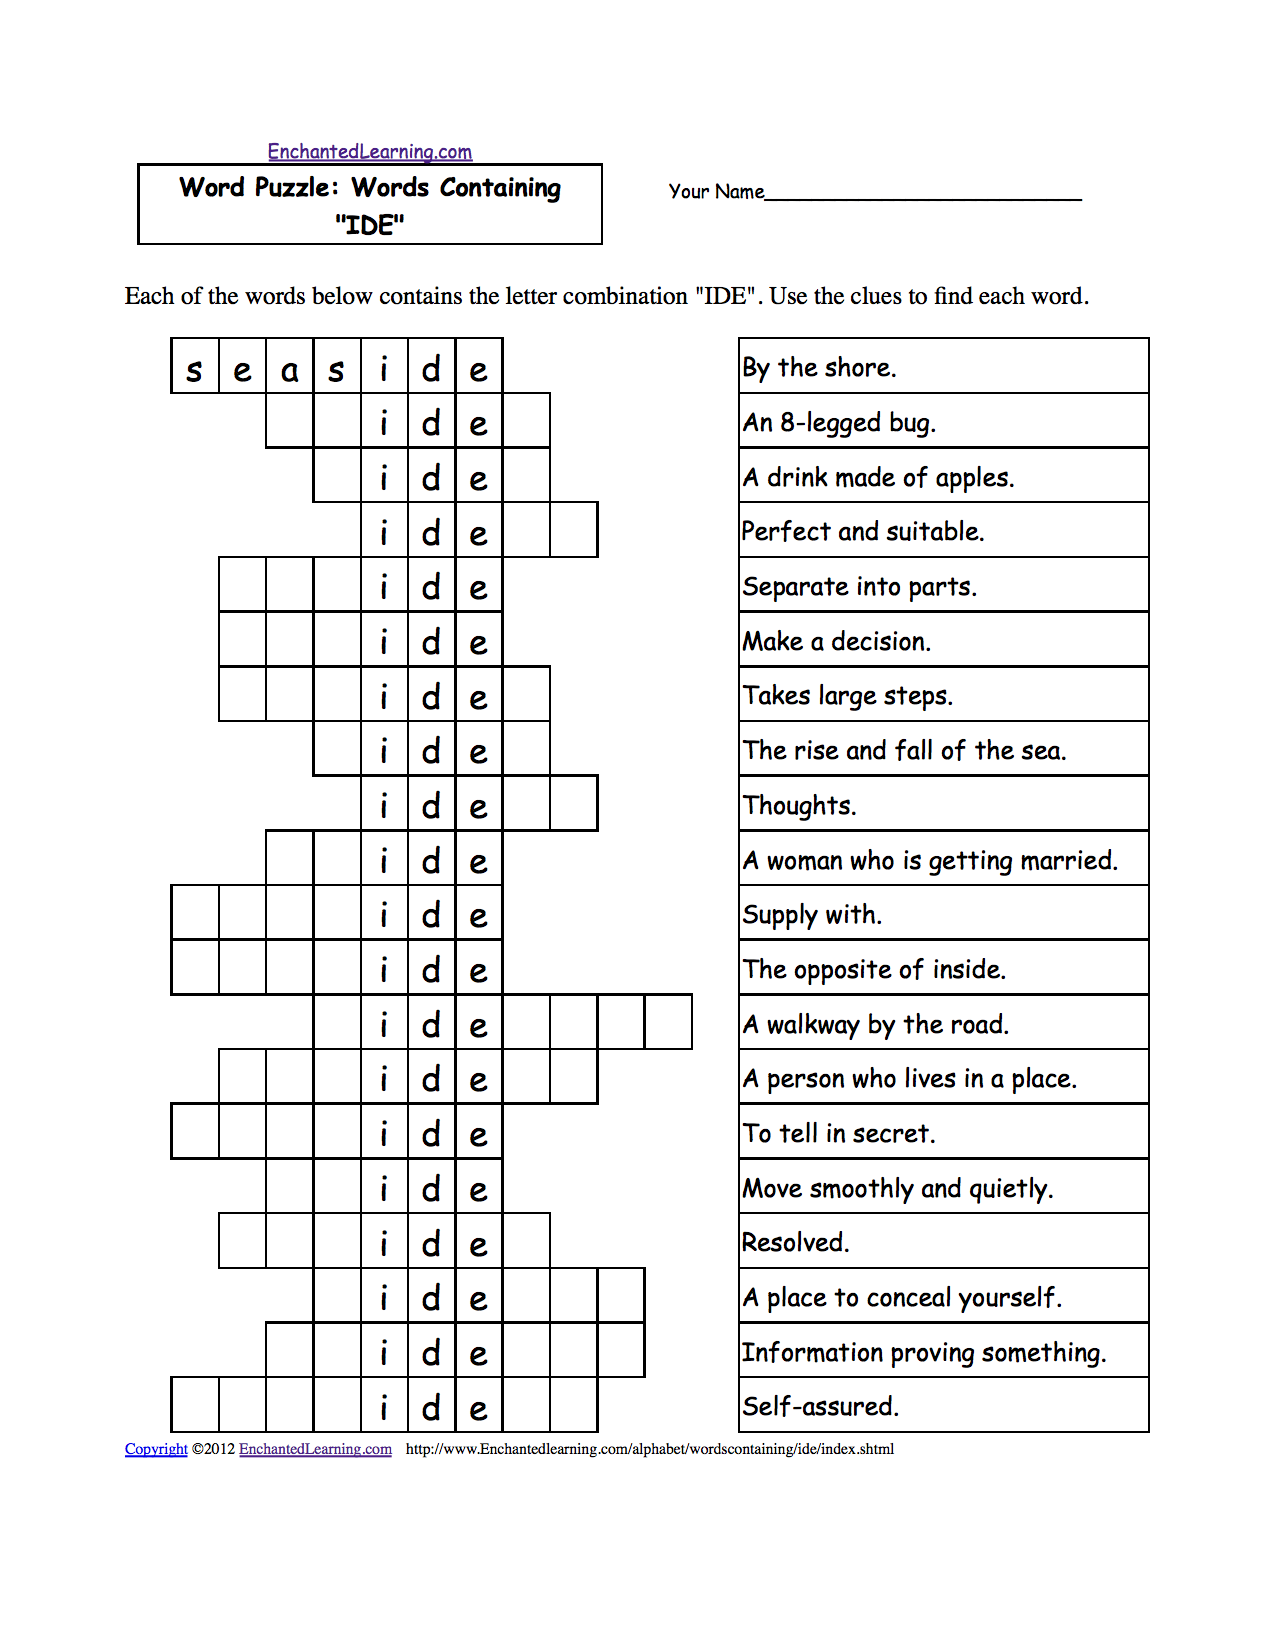 word-puzzles-words-containing-three-letter-combinations-worksheets-to-print